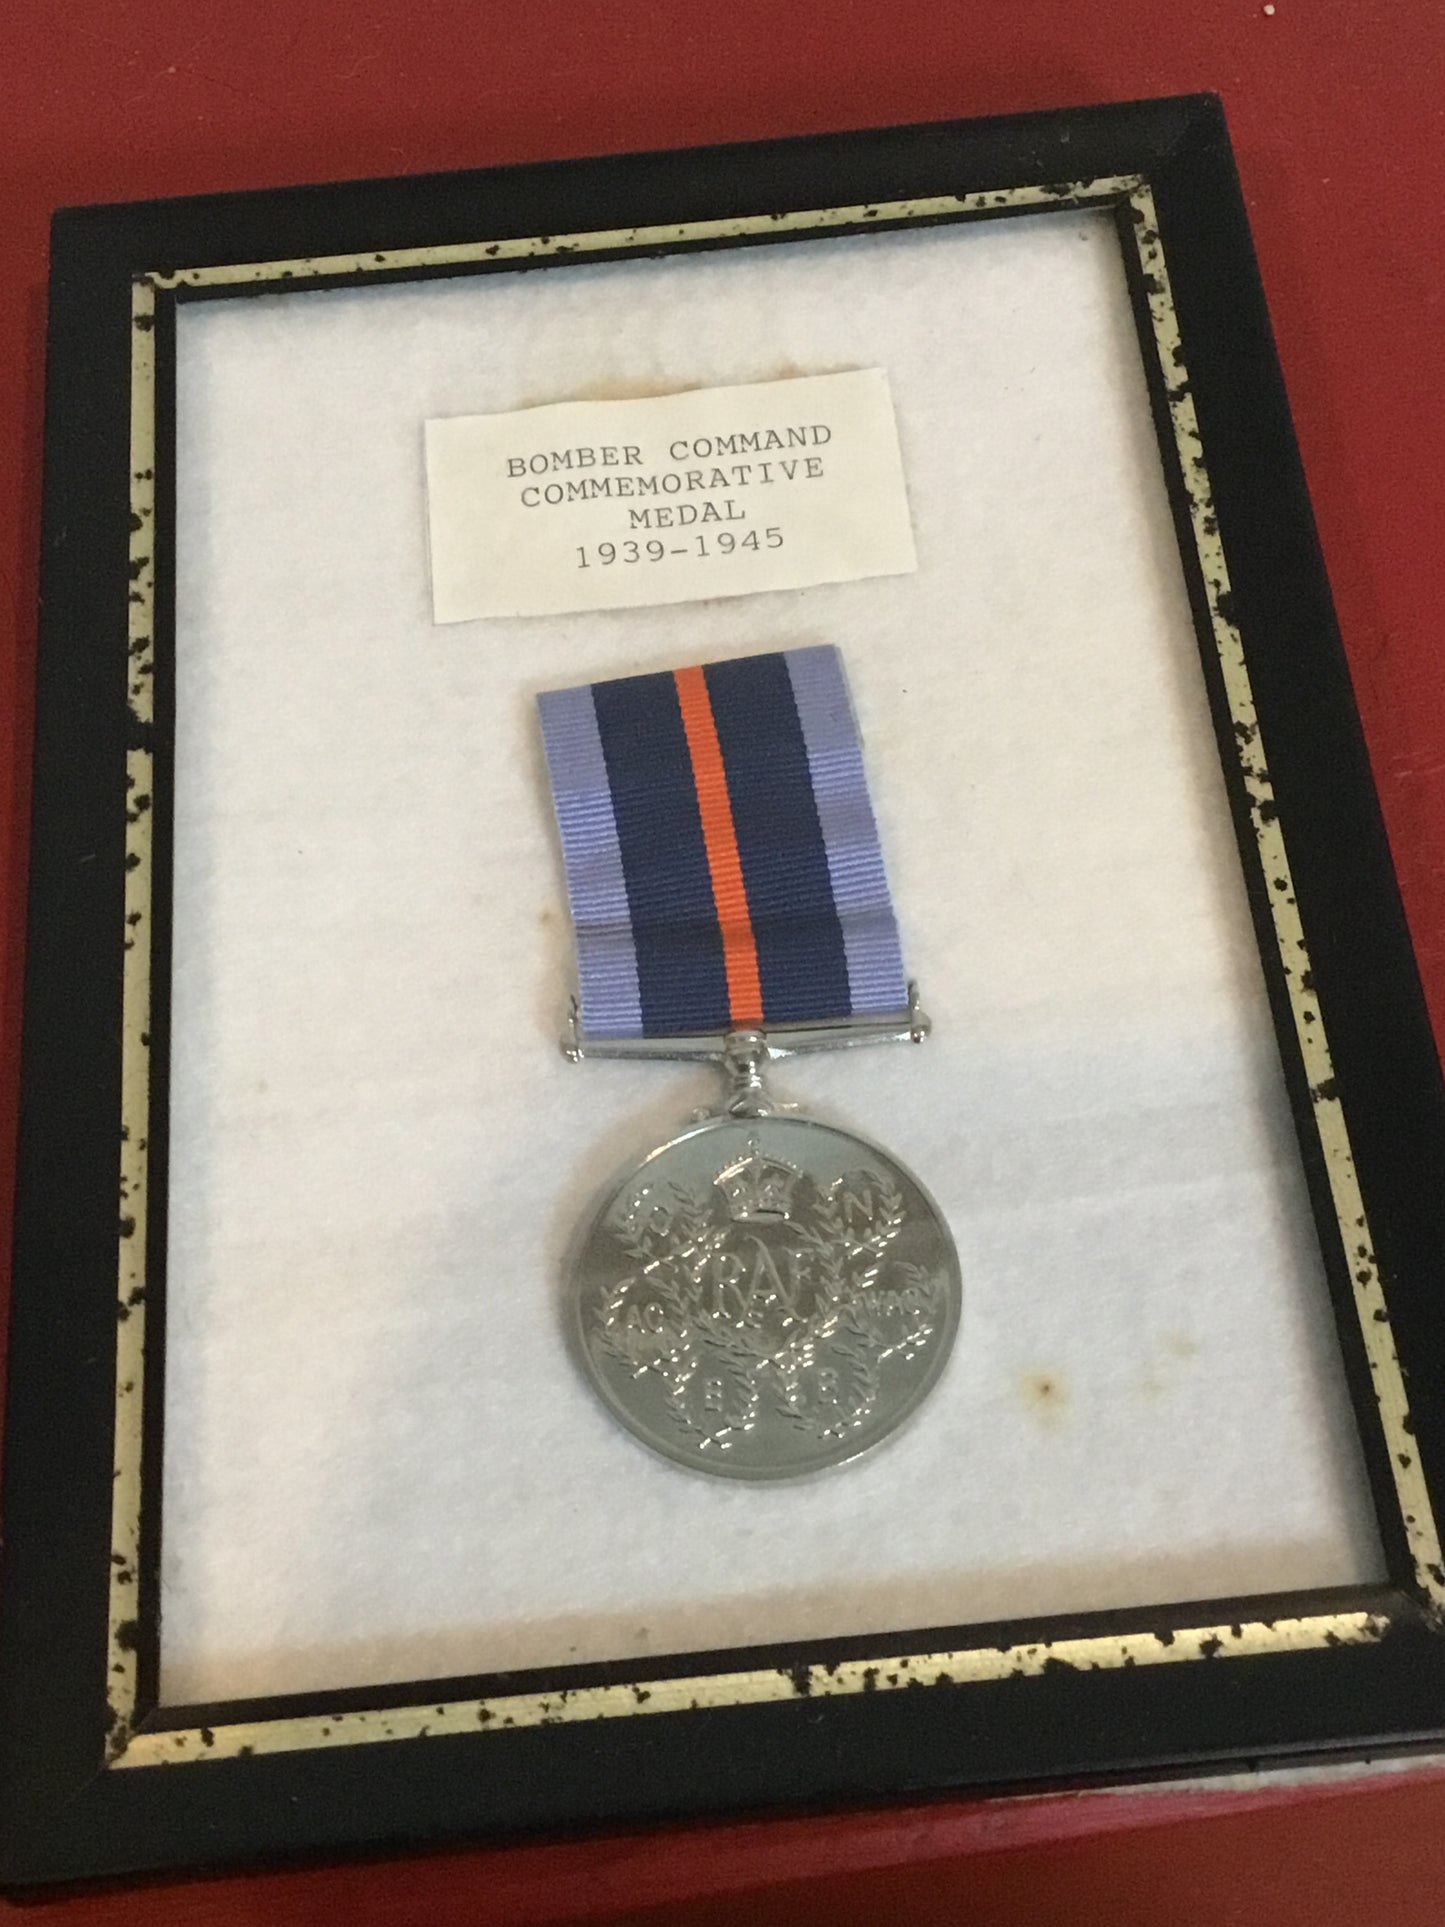 A WWII BRITISH BOMBER COMMAND  commemorative MEDAL 1939-1945